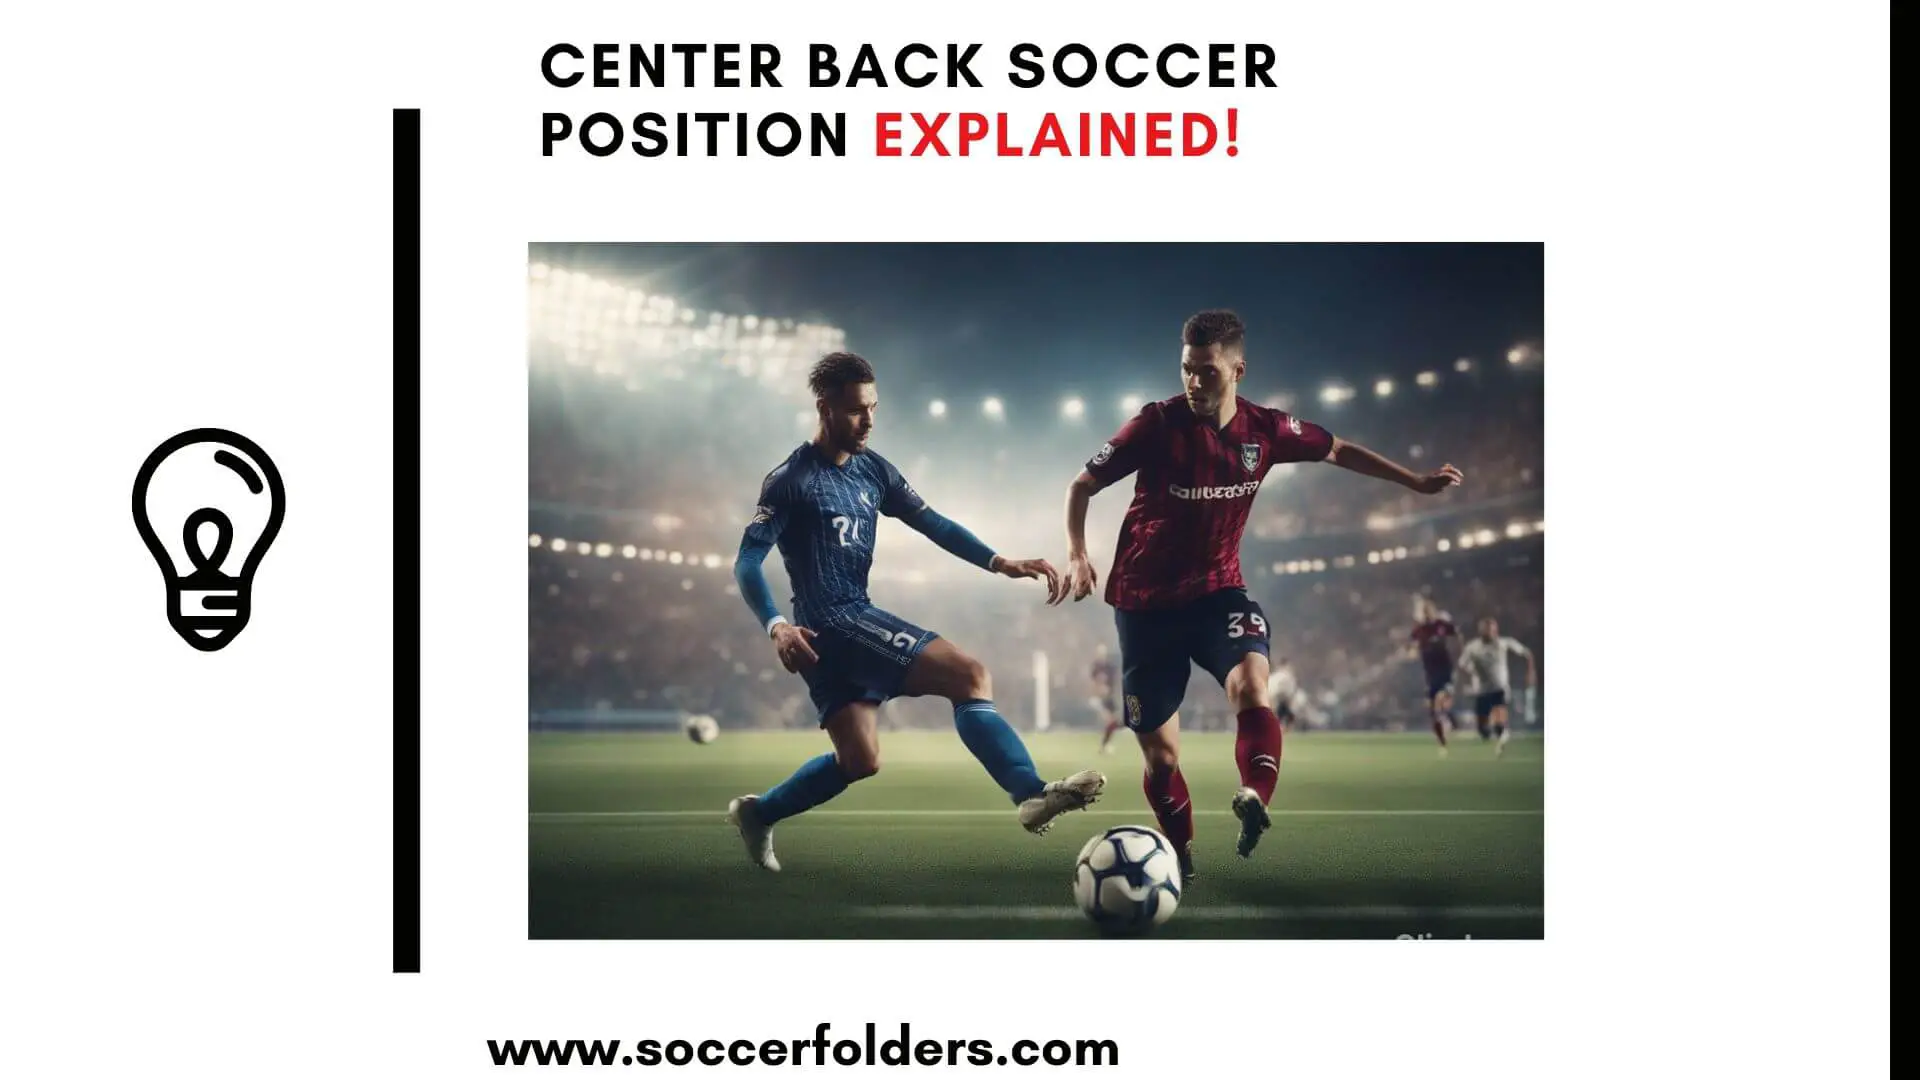 Center Back soccer position - Featured image